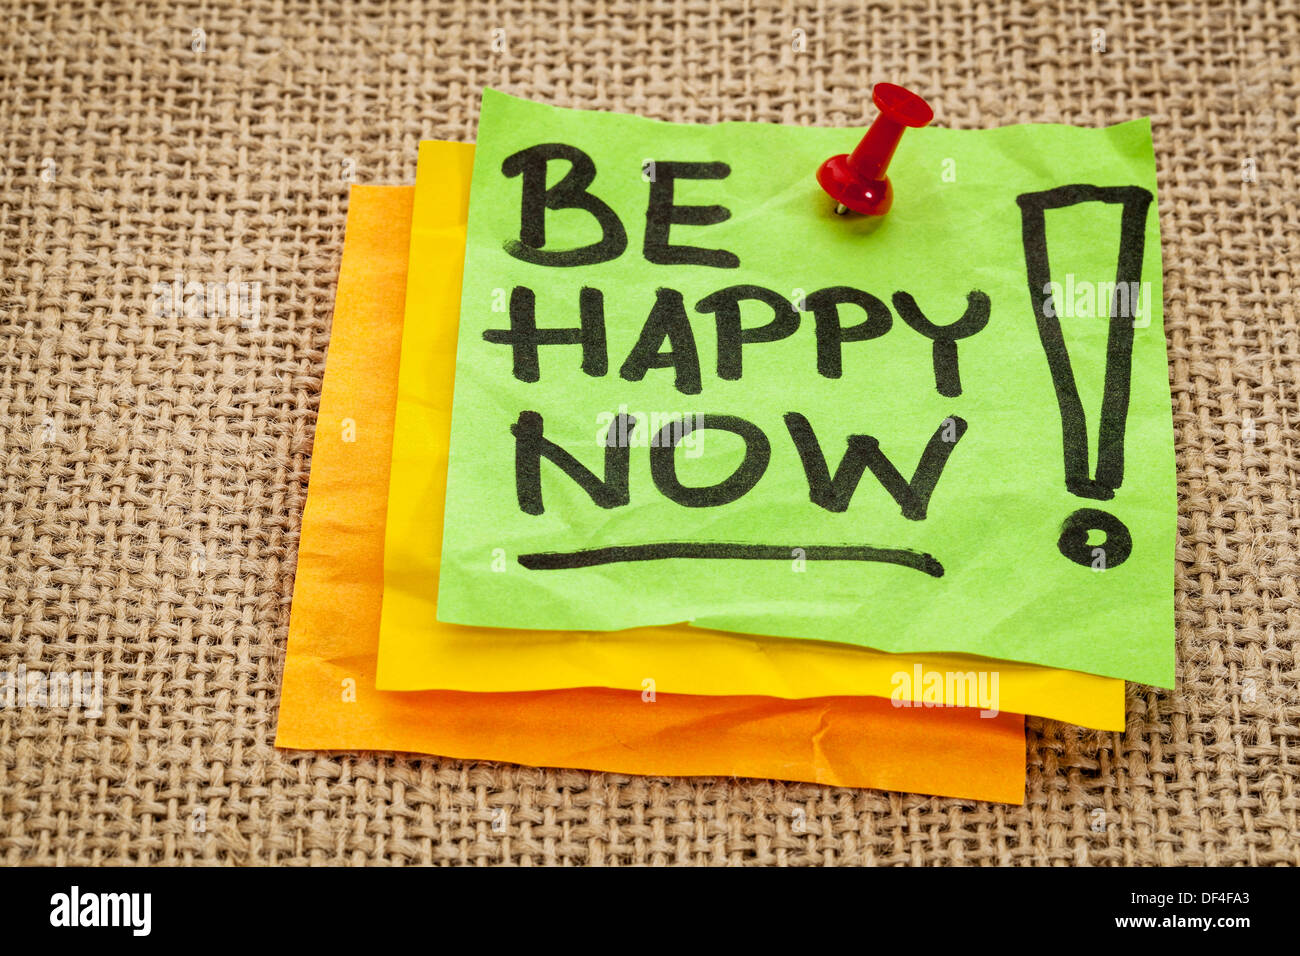 be happy now - motivation advice - handwriting on sticky notes Stock Photo